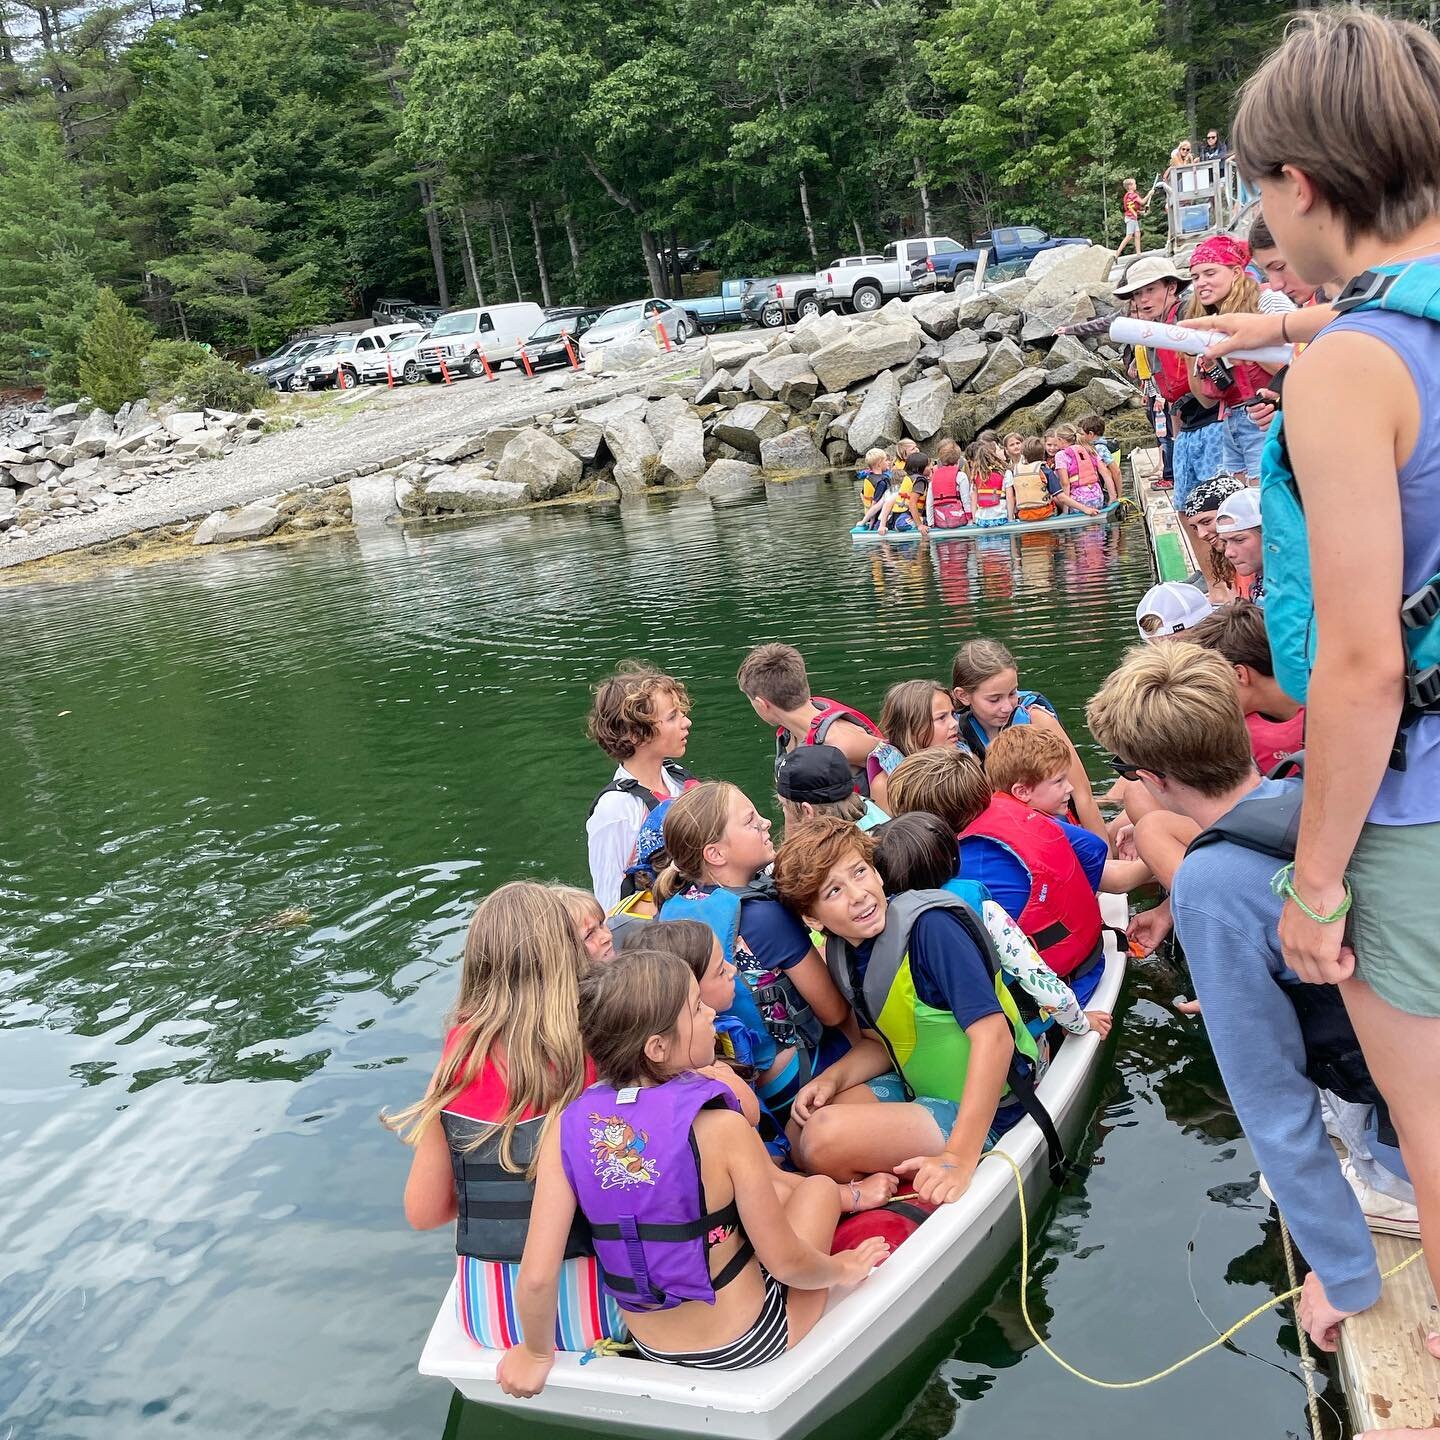 How many sailors can you fit in an Opti?! ⛵️ Countdown to Pirate Day 2023:) #kidswhosail #optisailing #summer2023 #ksea